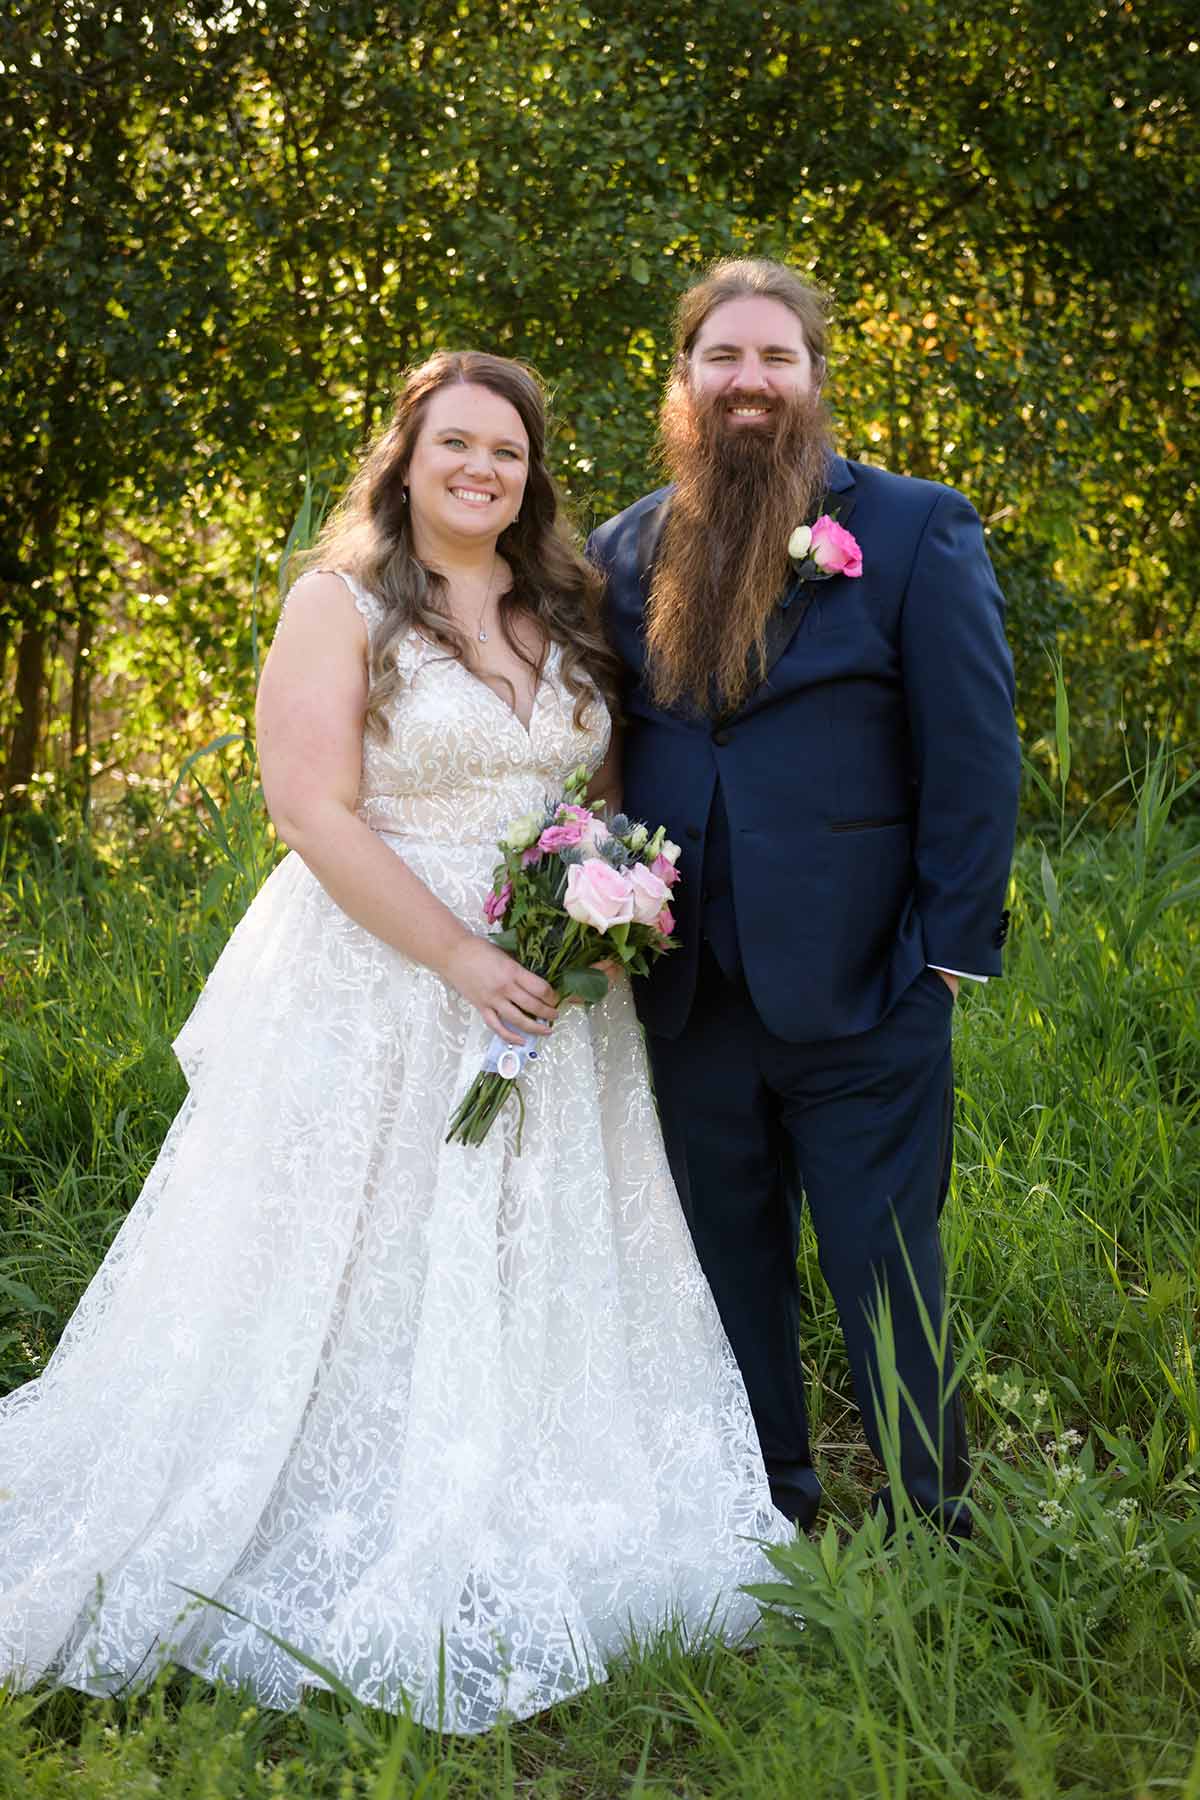 Portrait photograph of Chris Rydjeski ’13 and Amberlee Barbagallo ’12 posing outside standing in wedding attire next to each other smiling in a forest grassy area